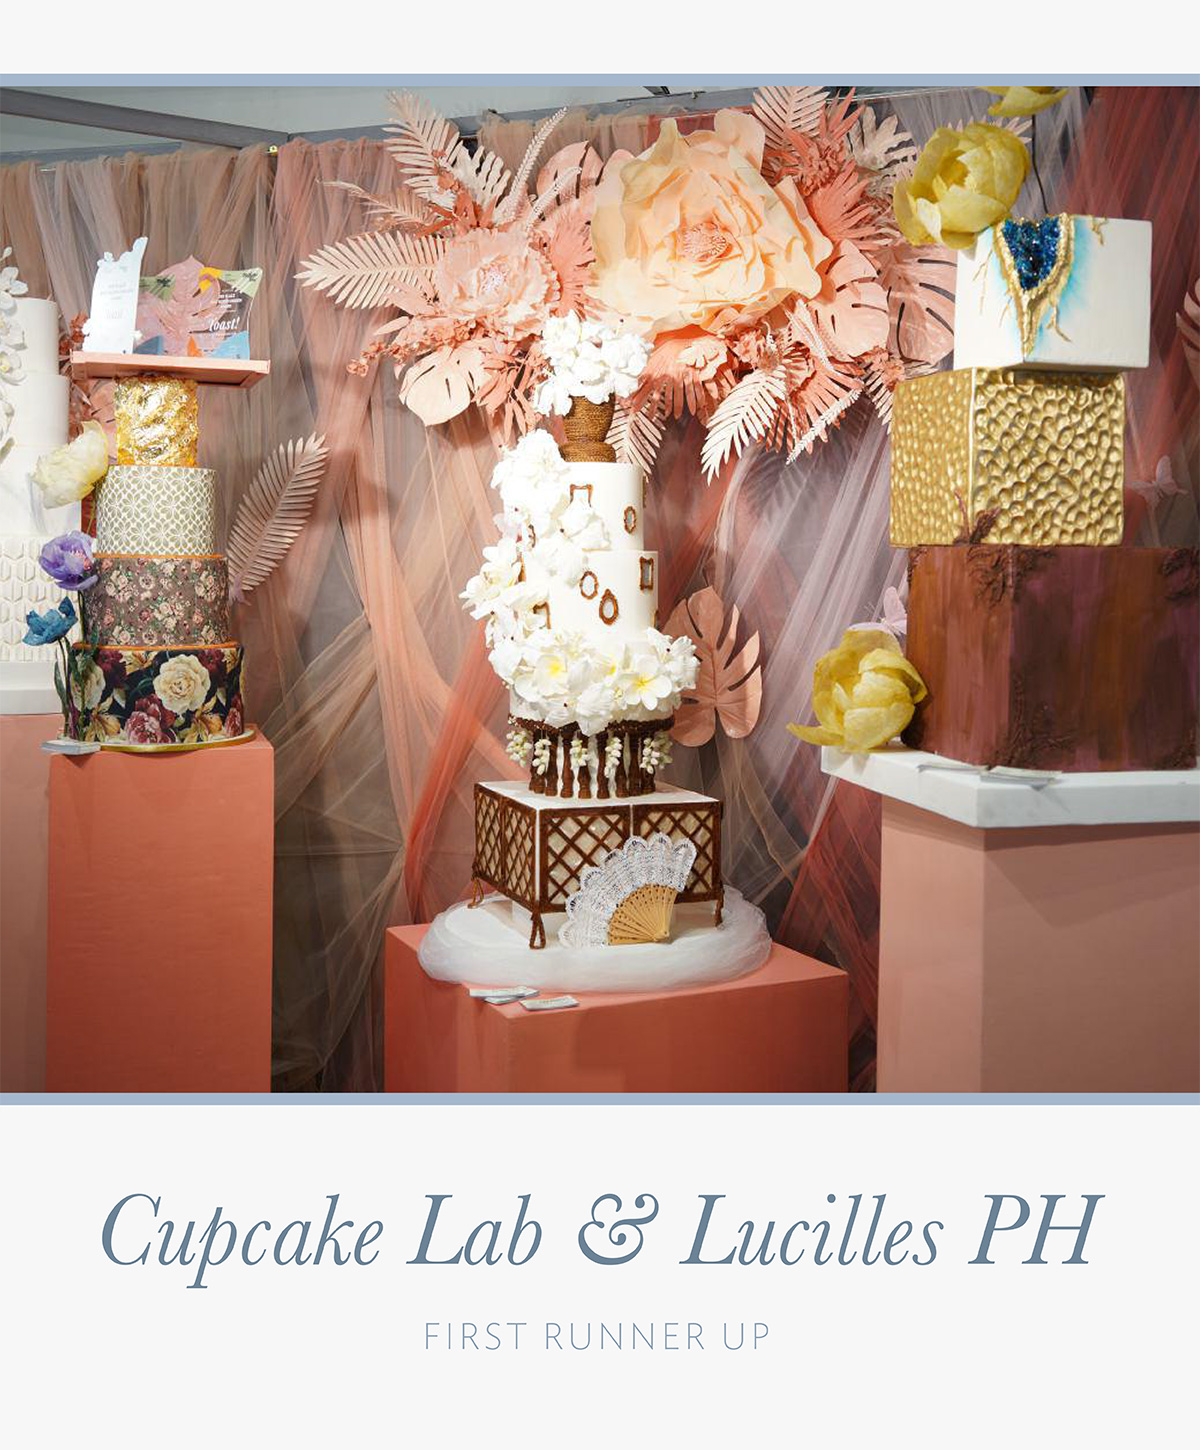 Cupcake Lab and Lucilles PH: First Runner Up